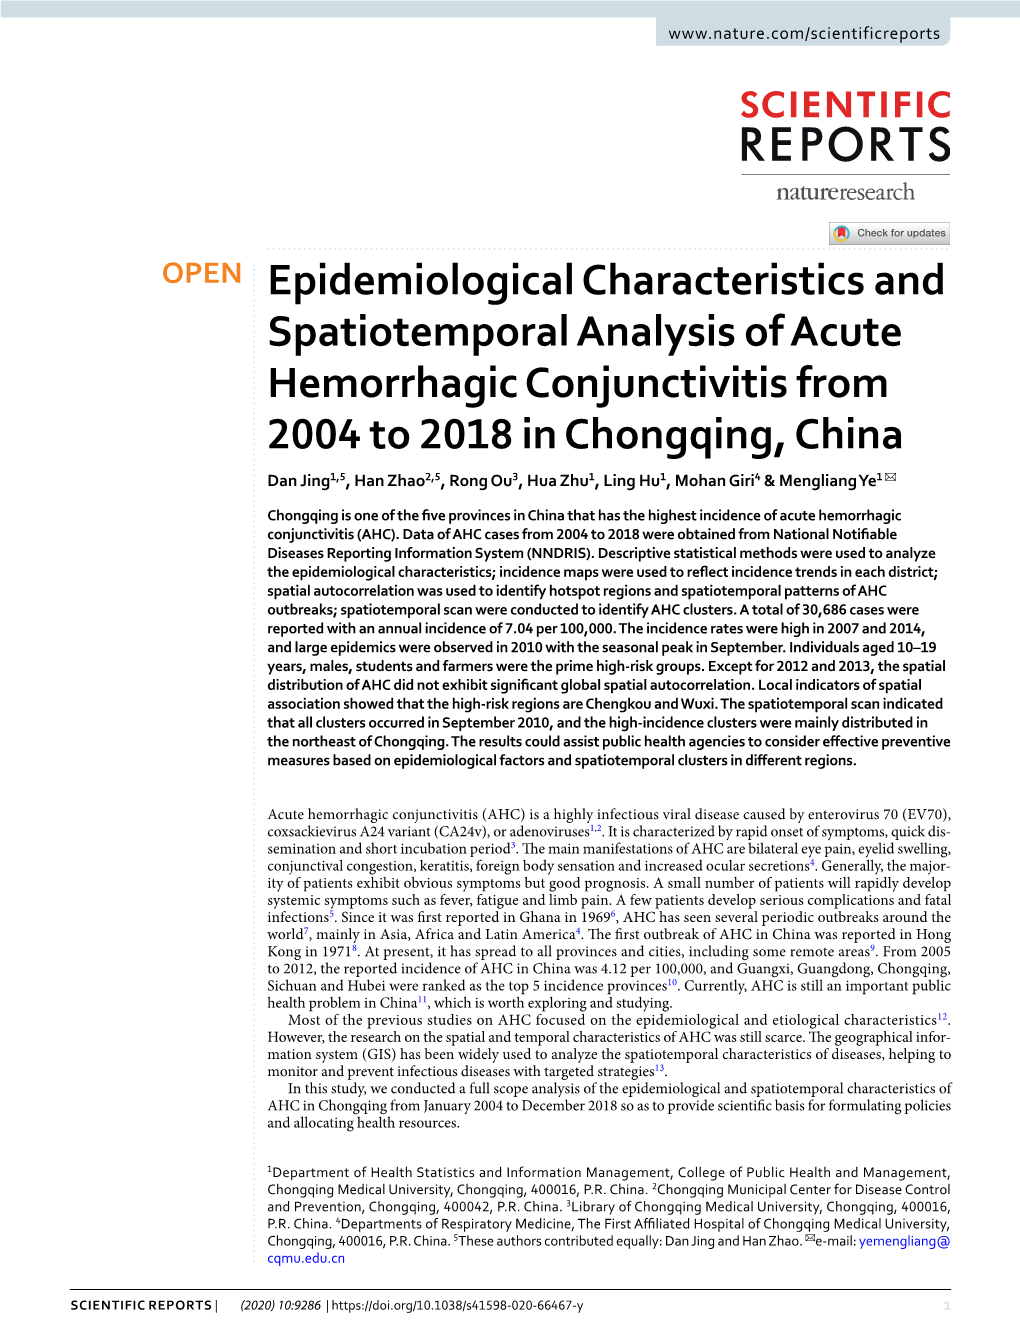 Epidemiological Characteristics and Spatiotemporal Analysis Of